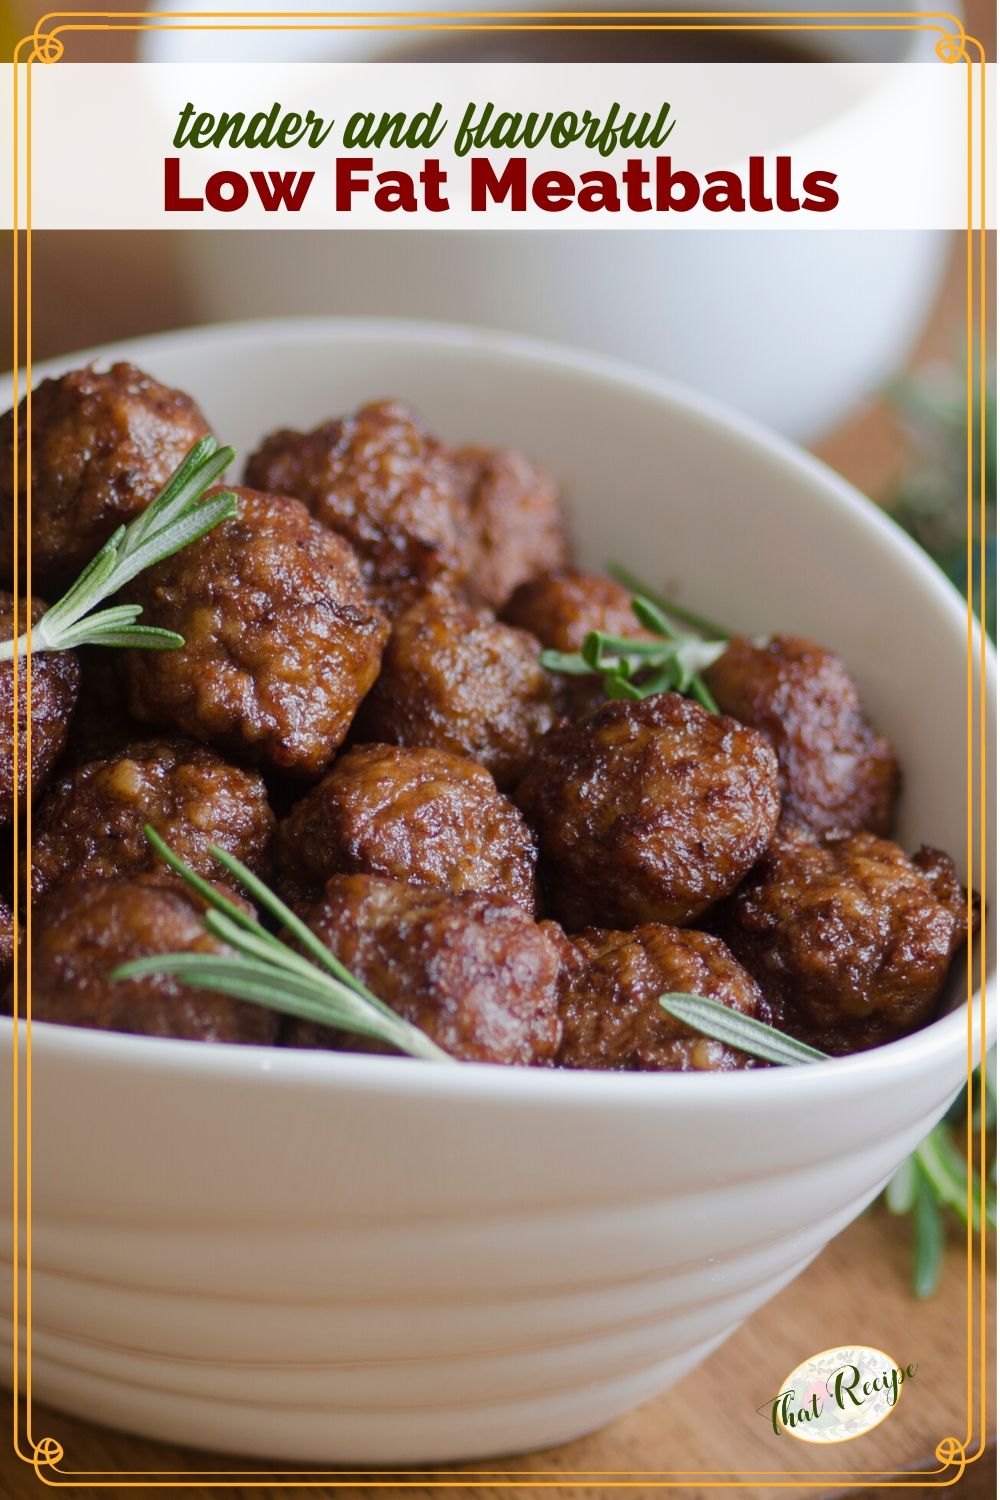 bowl of meatballs with rosemary garnish and text overlay "tender and flavorful low fat meatballs"